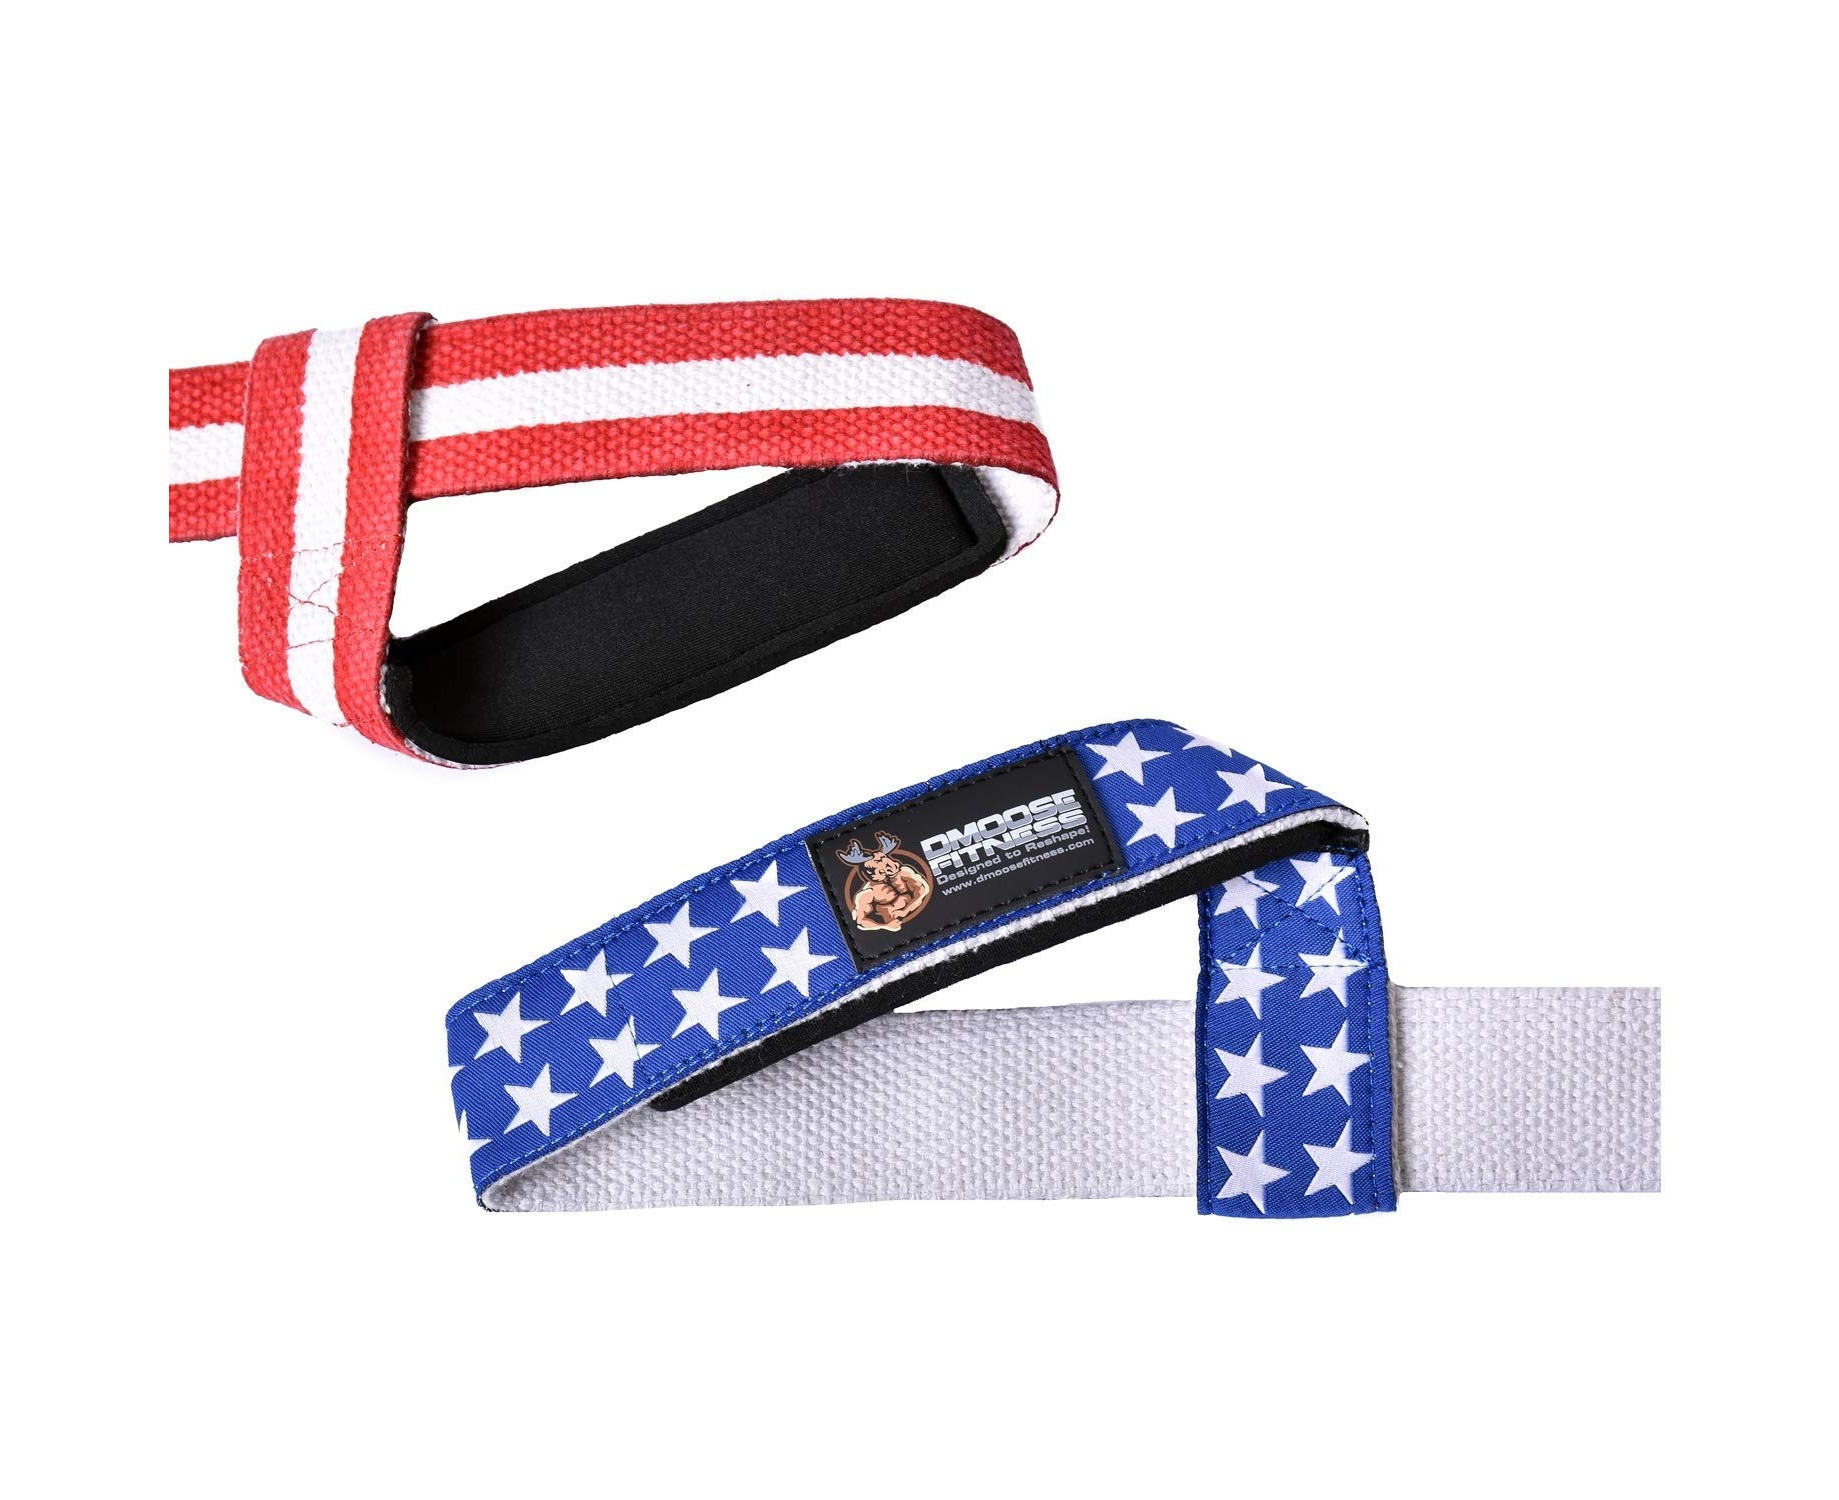 DMoose Fitness Lifting Straps